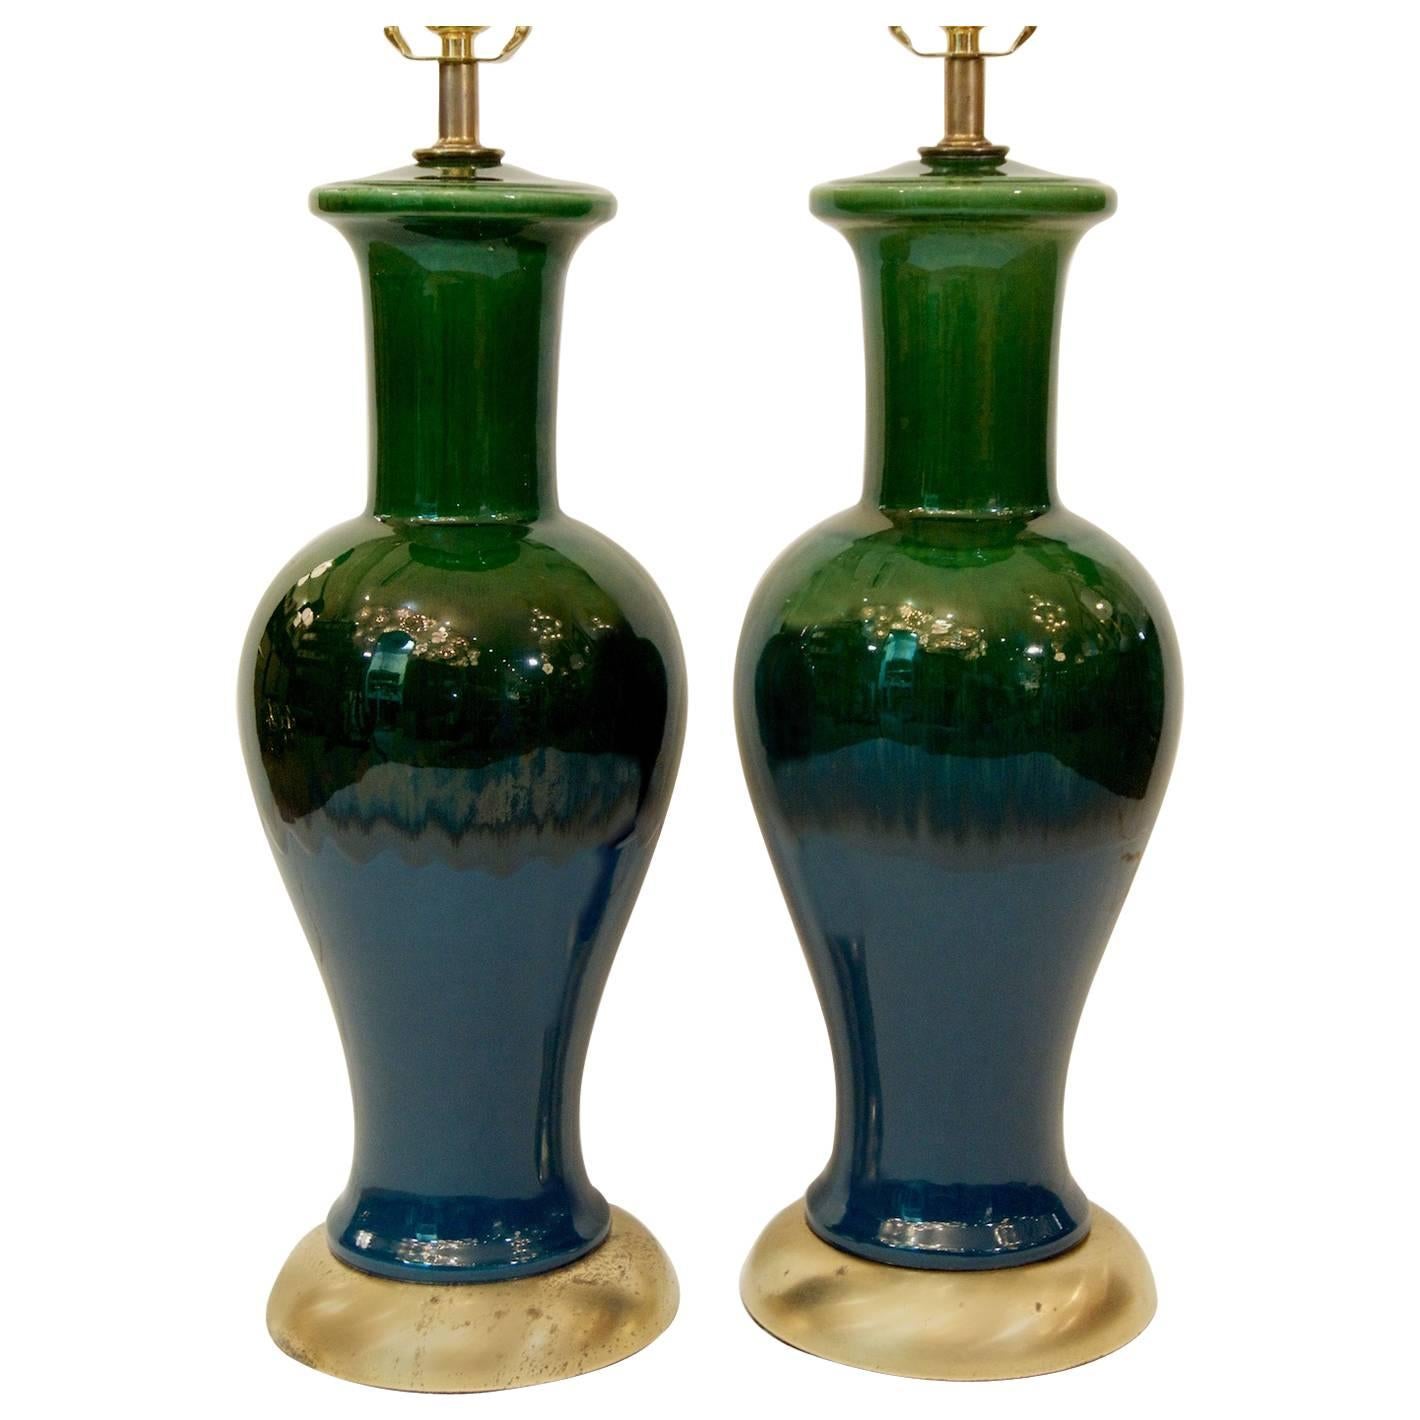 Pair of Blue and Green Glazed Table Lamps